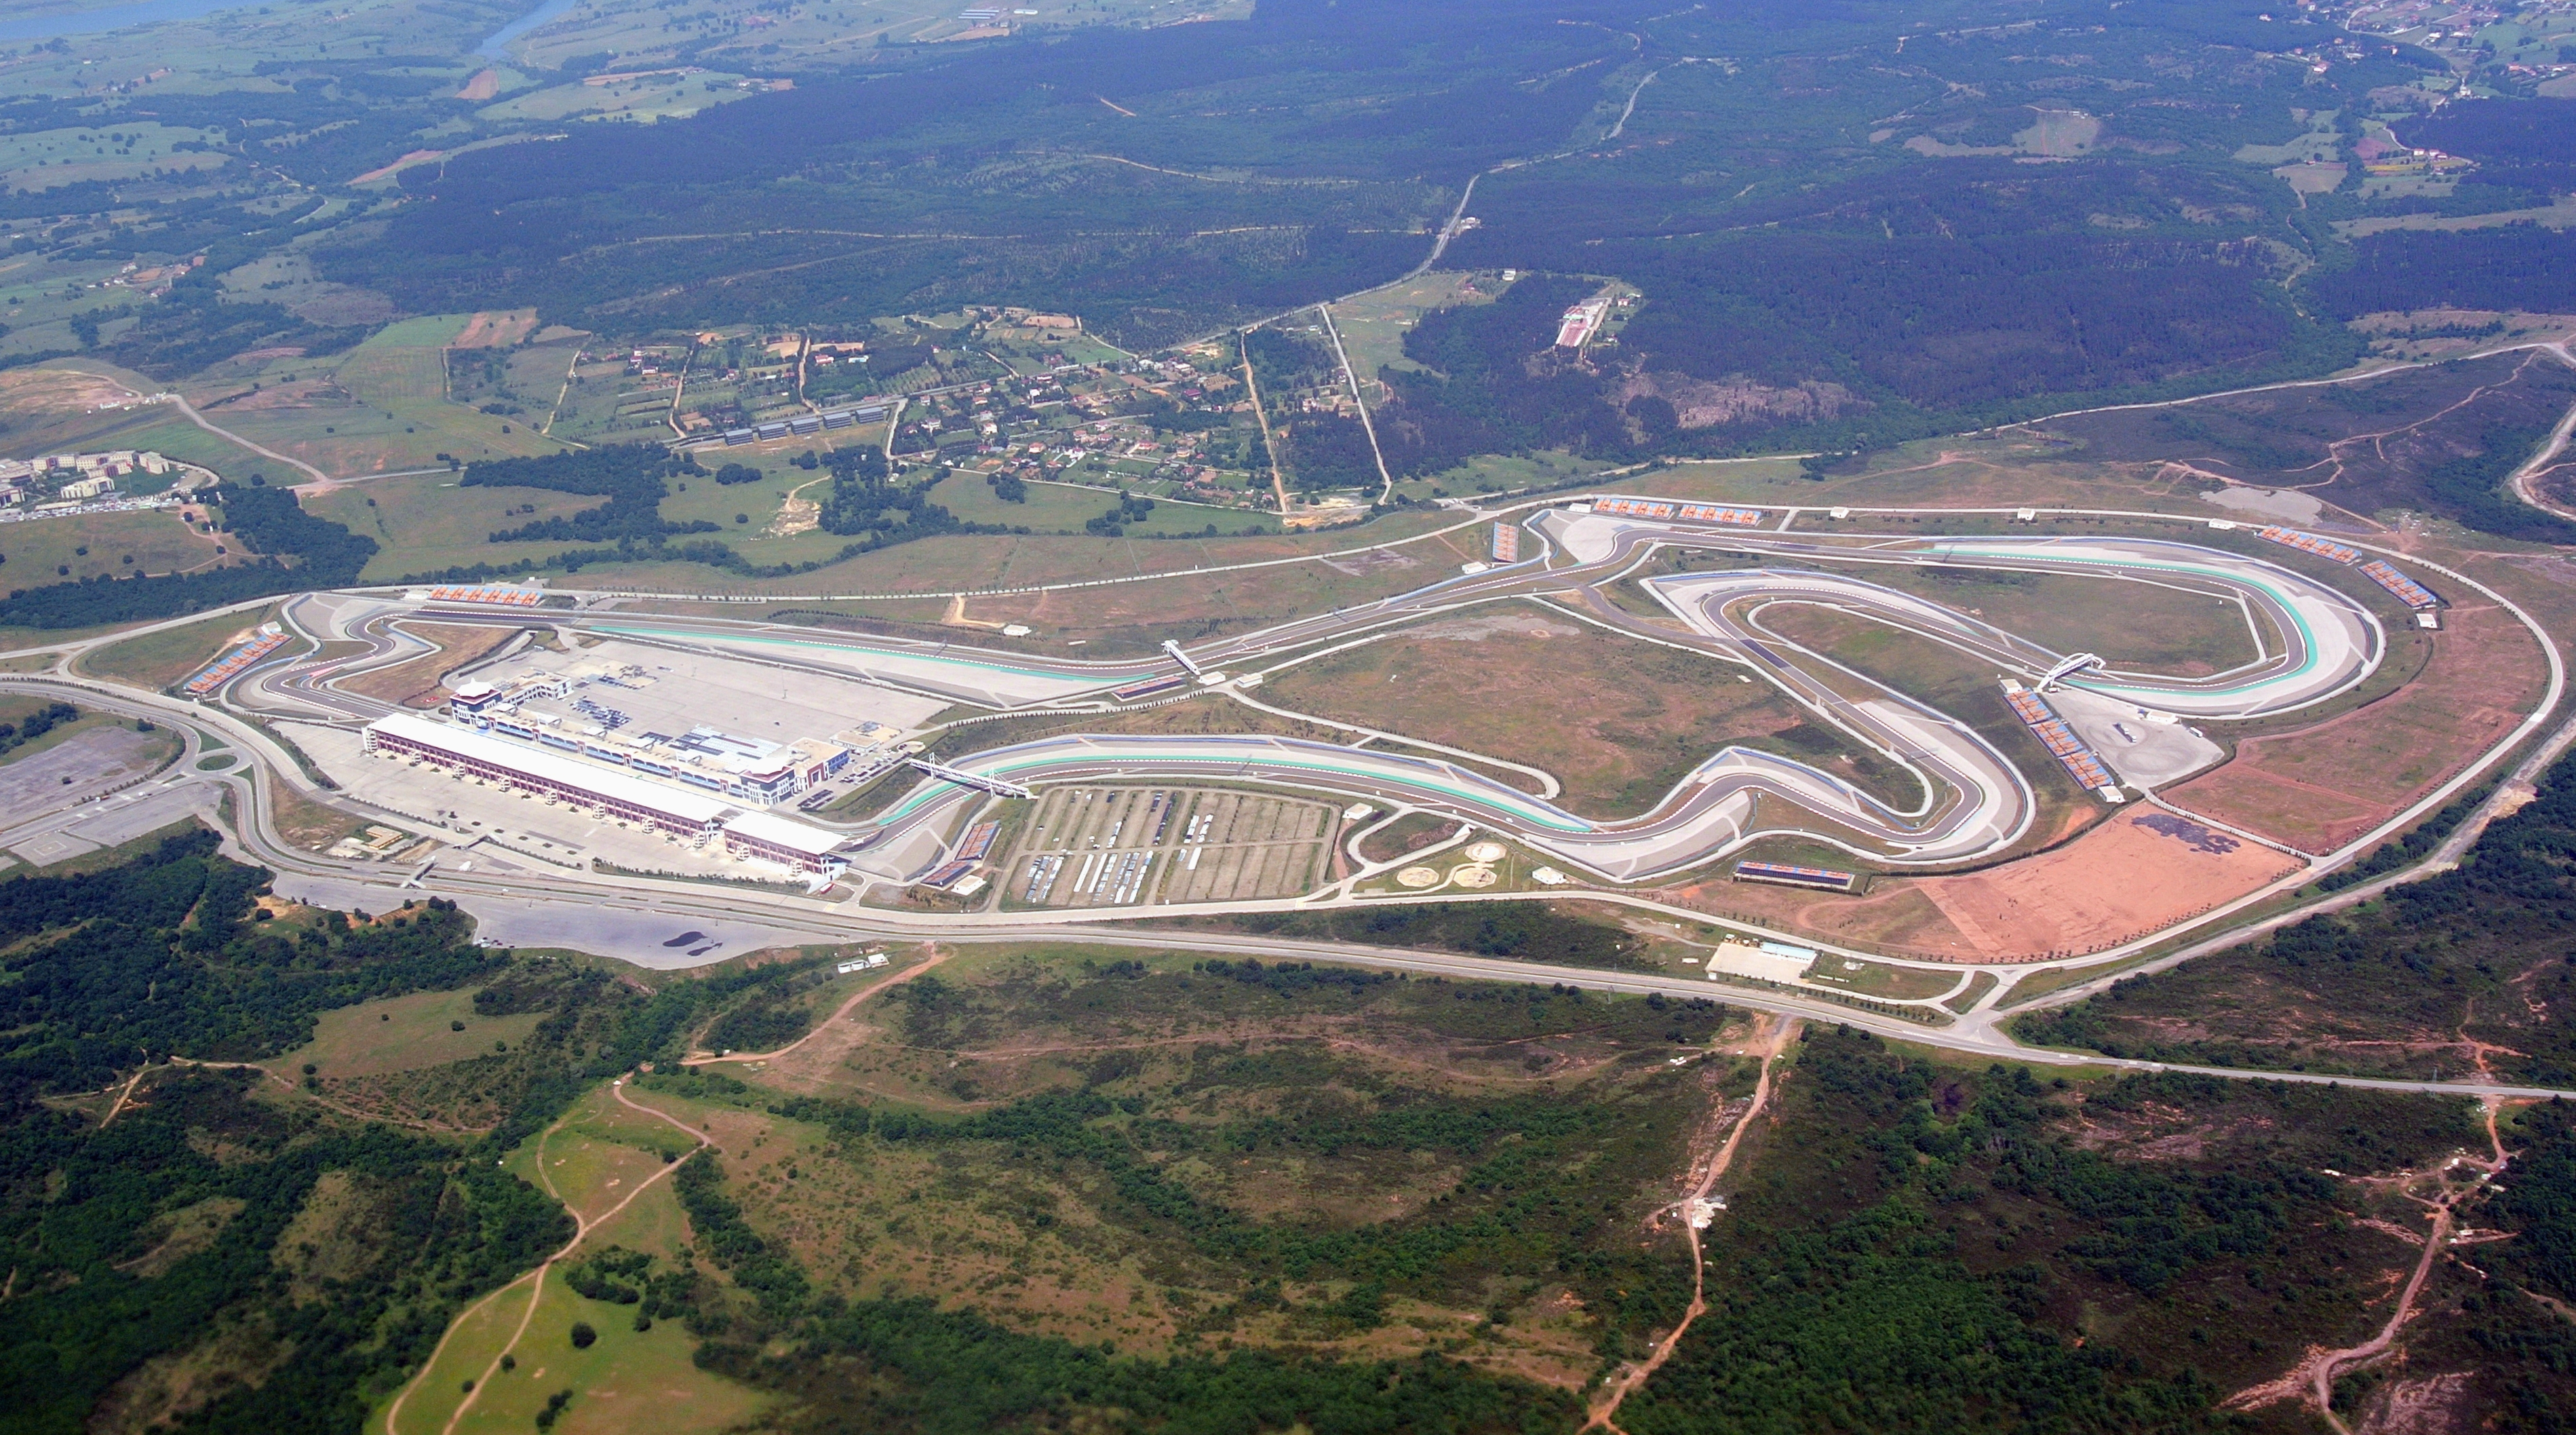 File:Istanbul Park aerial.jpg - Wikimedia Commons